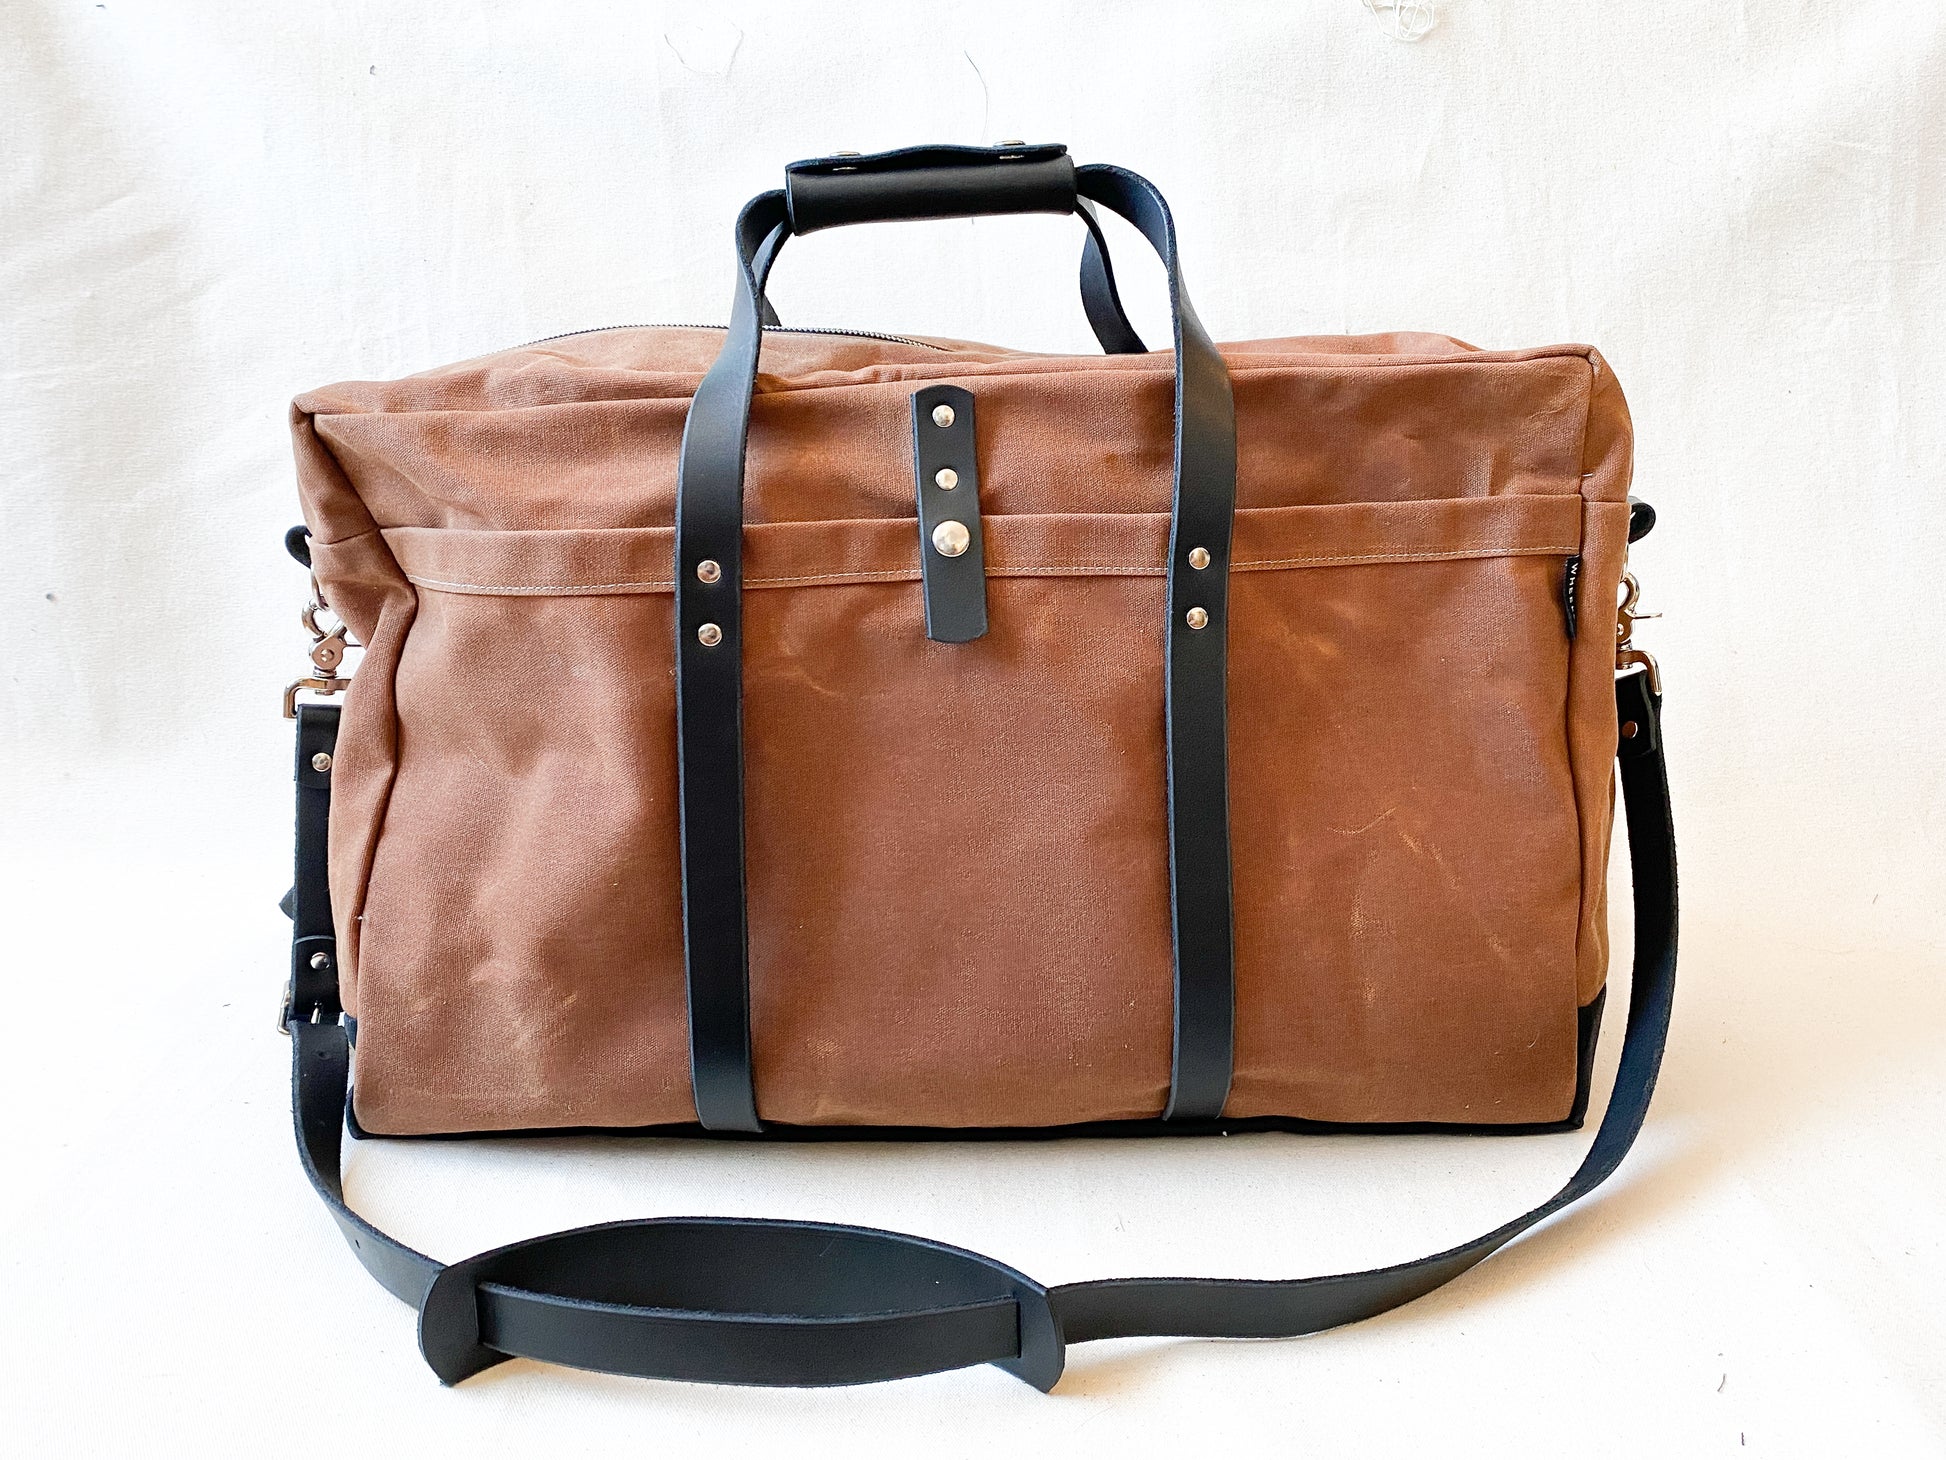 Carry-on Duffel in tan with dark brown leather. 